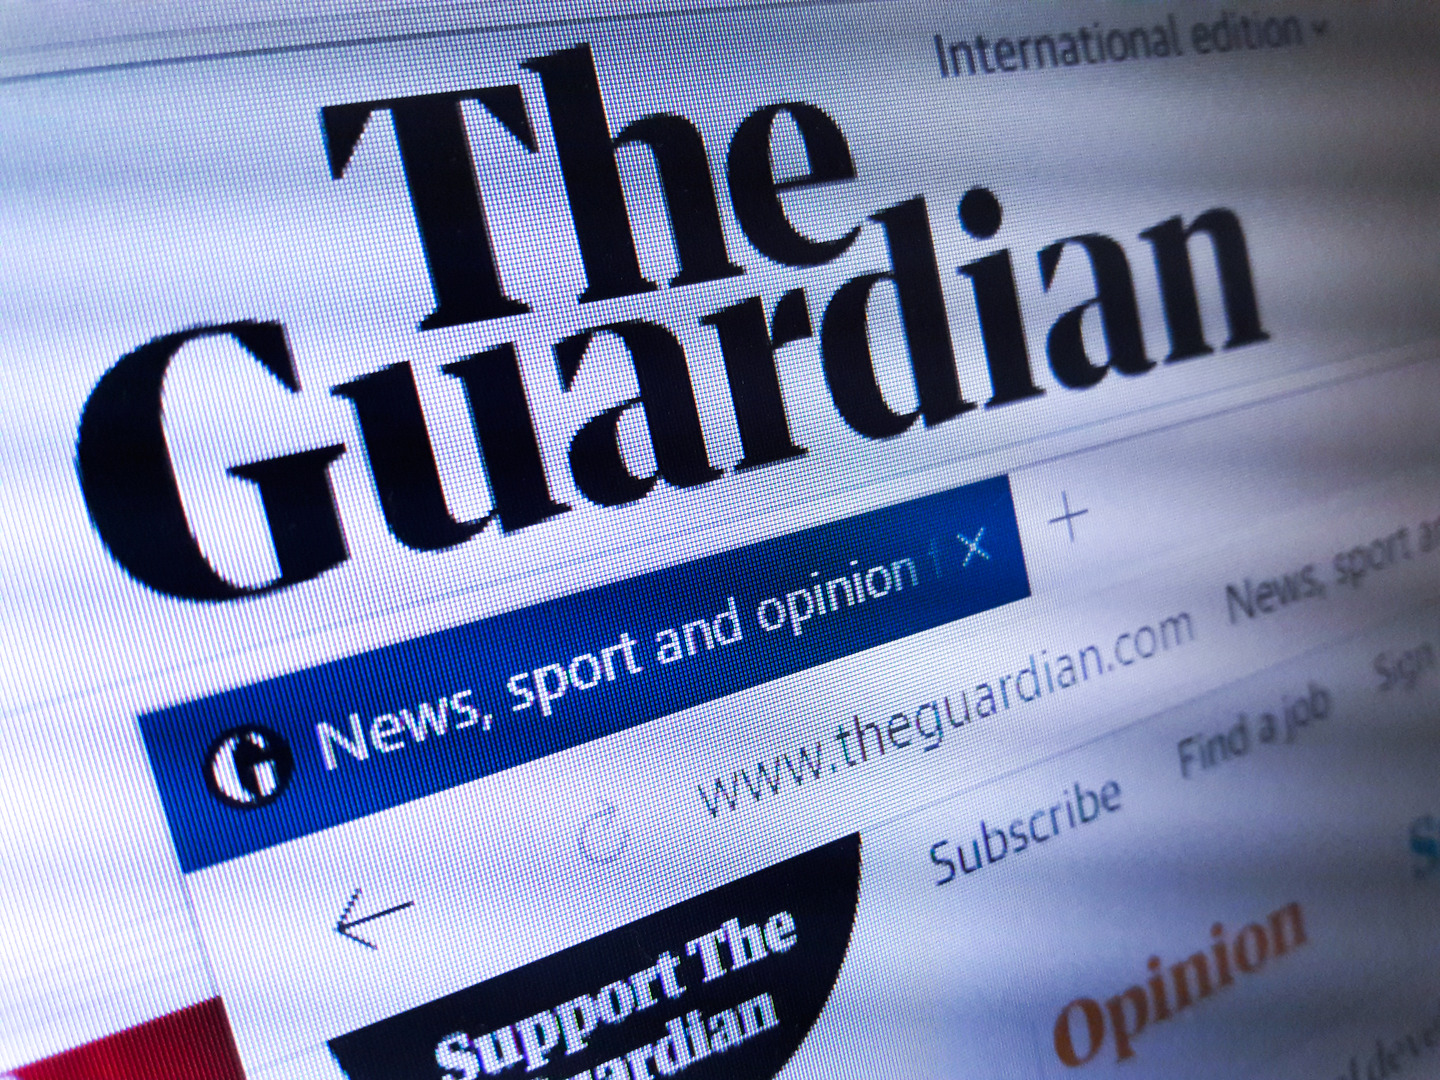 Guardian hit by ransomware?